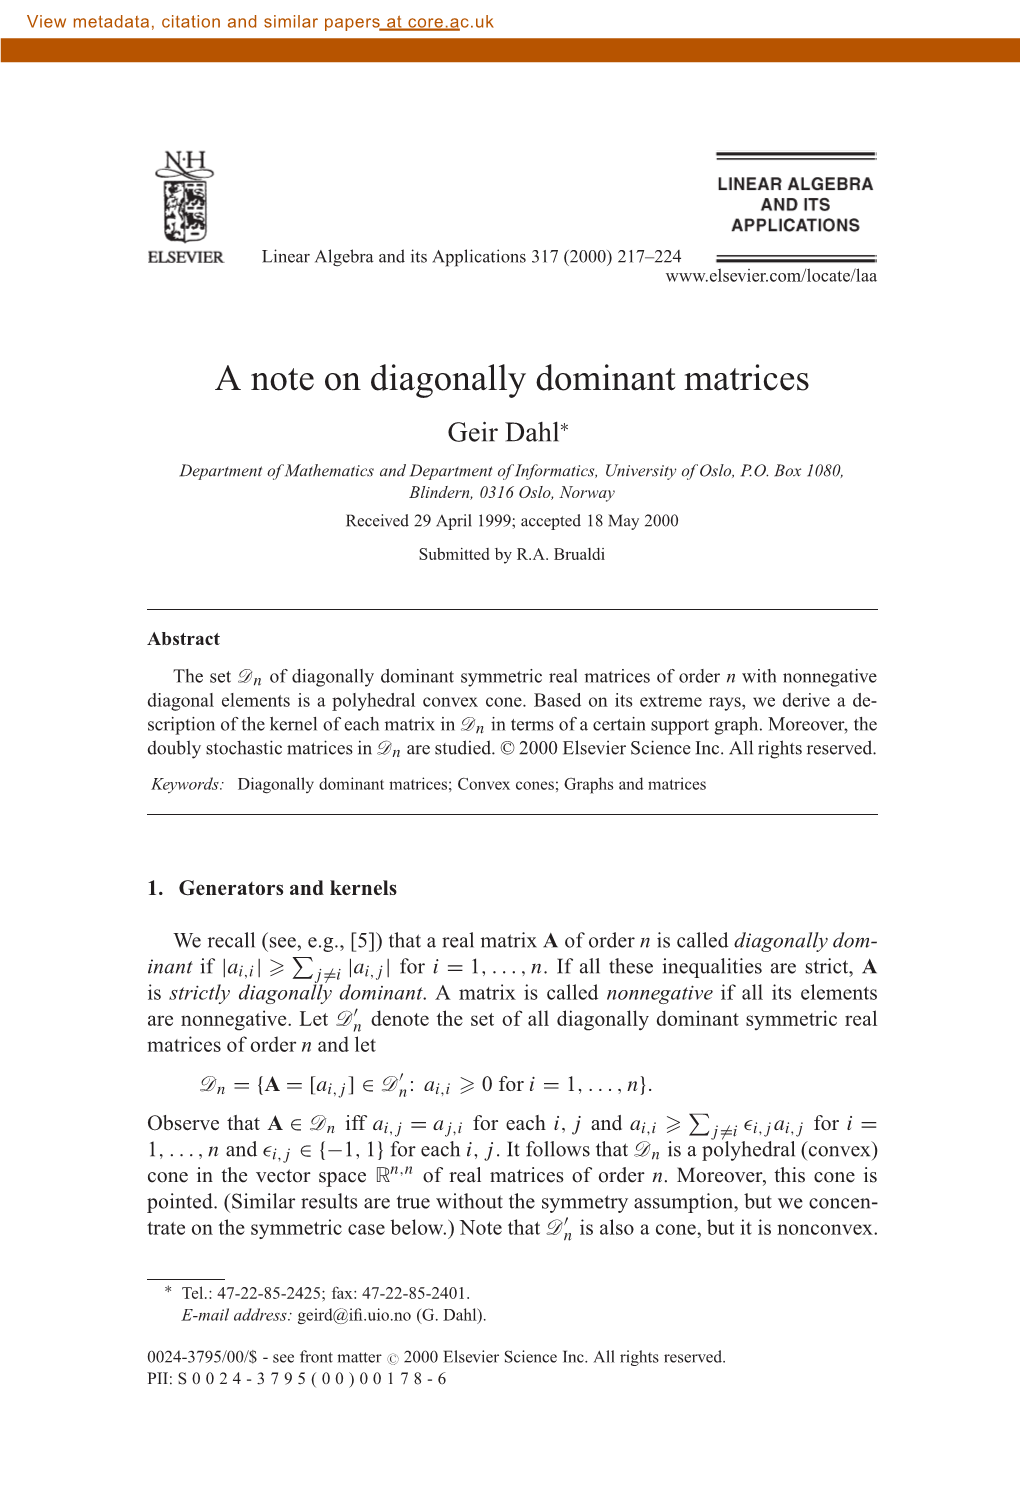 A Note on Diagonally Dominant Matrices Geir Dahl∗ Department of Mathematics and Department of Informatics, University of Oslo, P.O